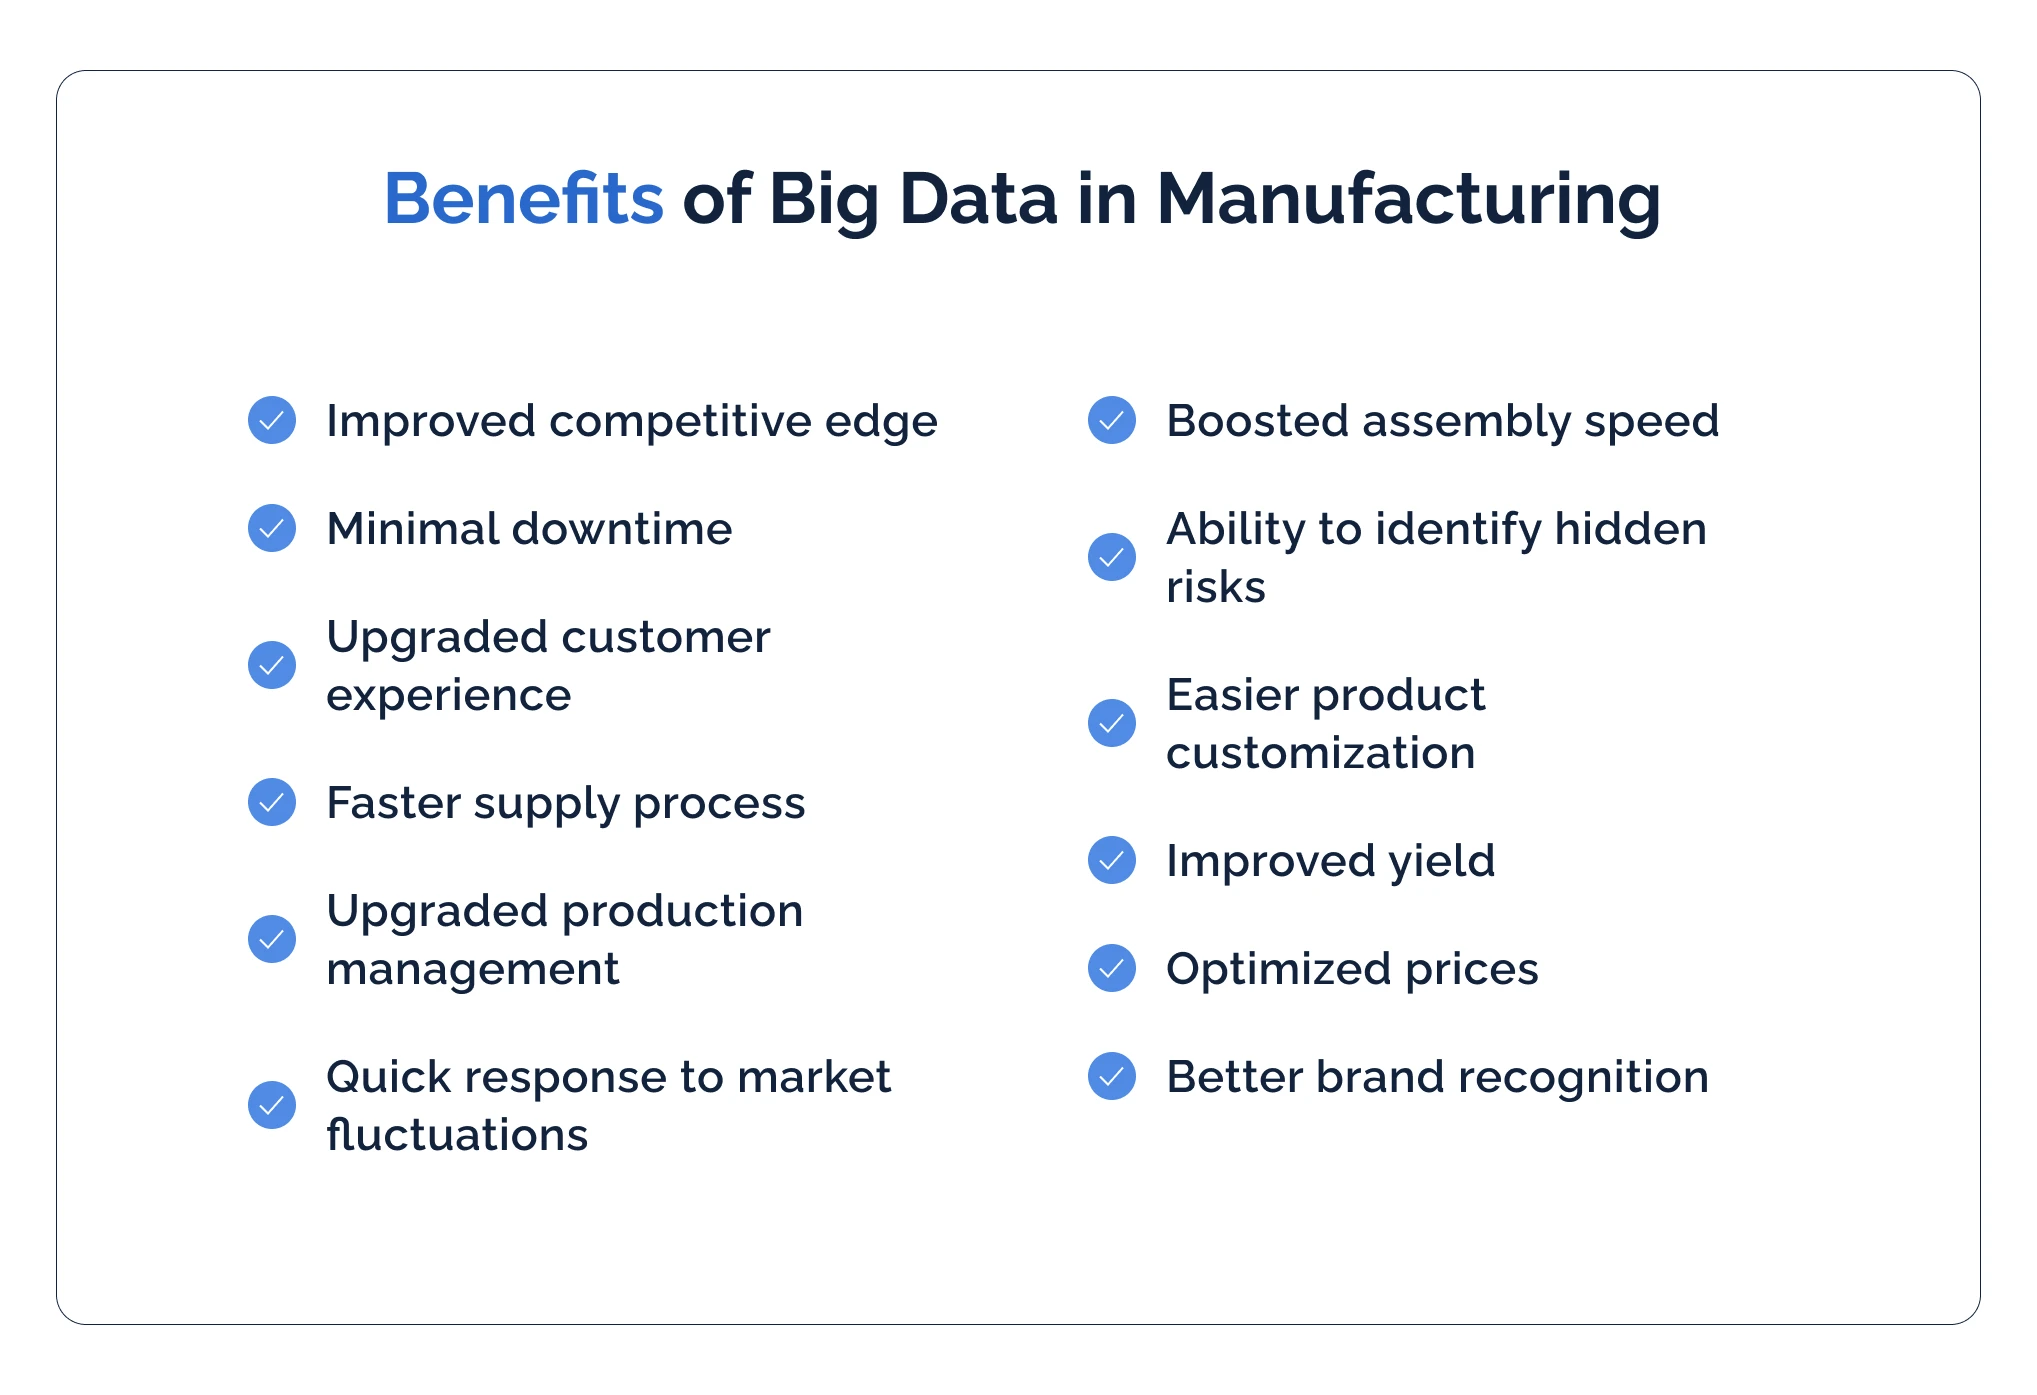 Benefits of Big Data in manufacturing